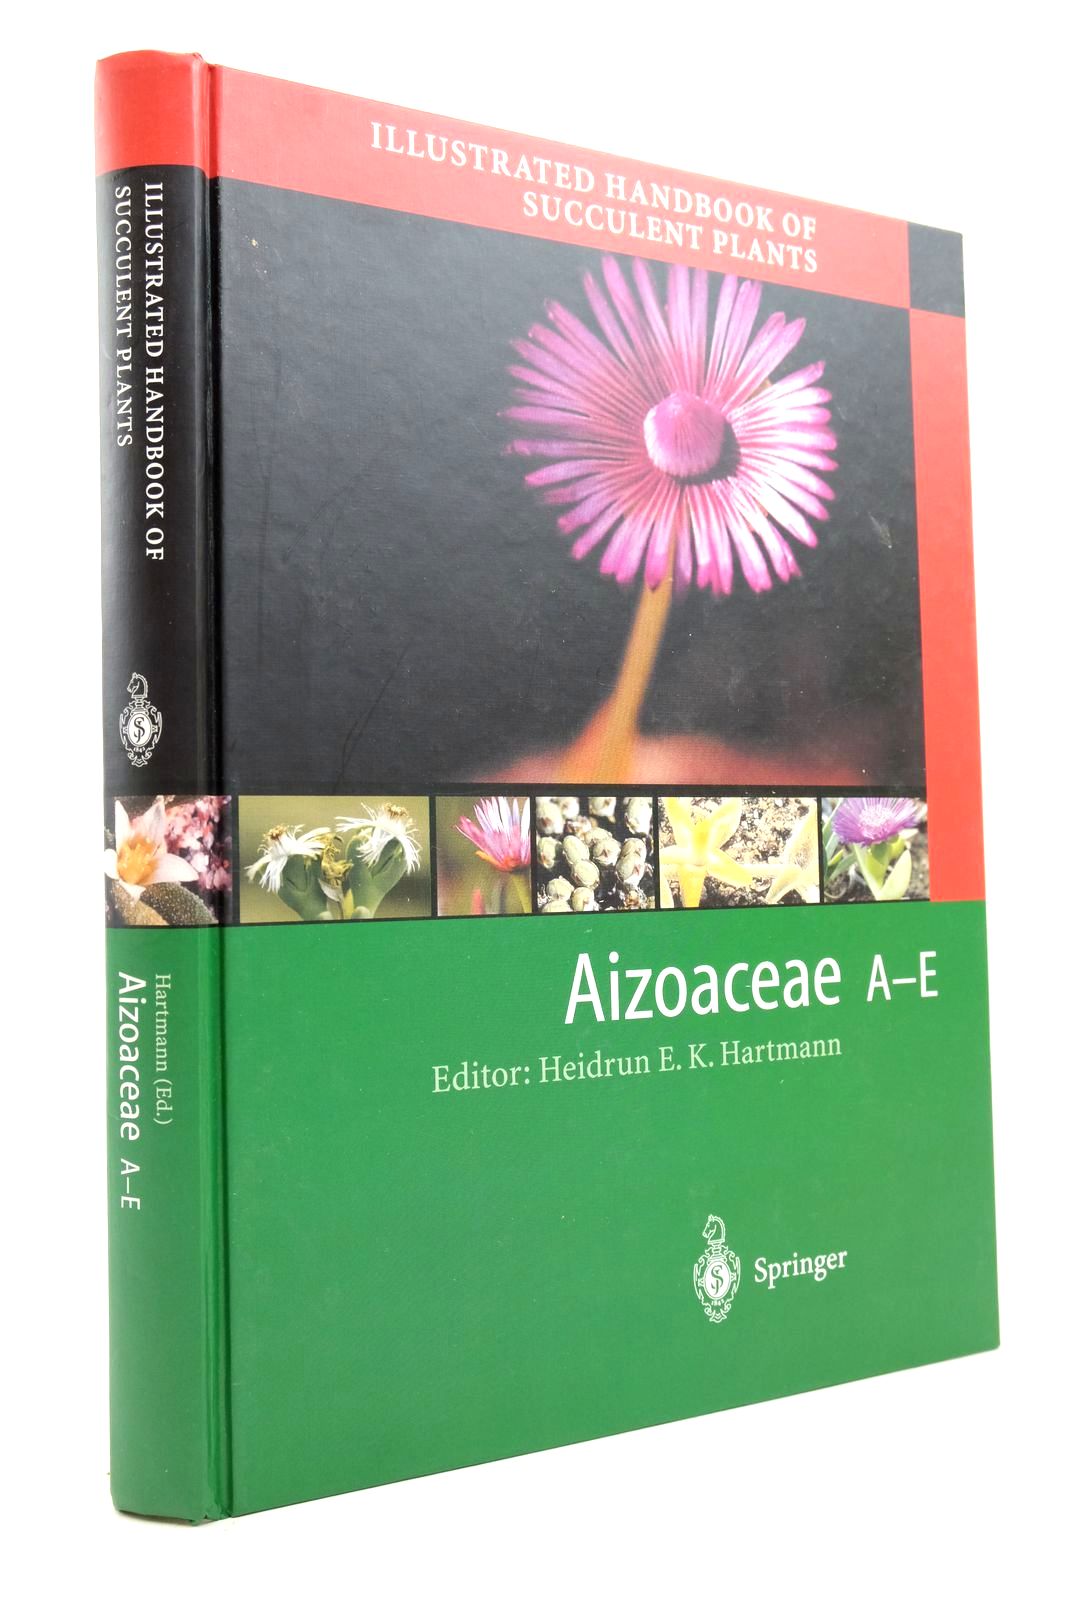 Photo of ILLUSTRATED HANDBOOK OF SUCCULENT PLANTS: AIZOACEAE A-E- Stock Number: 2139827